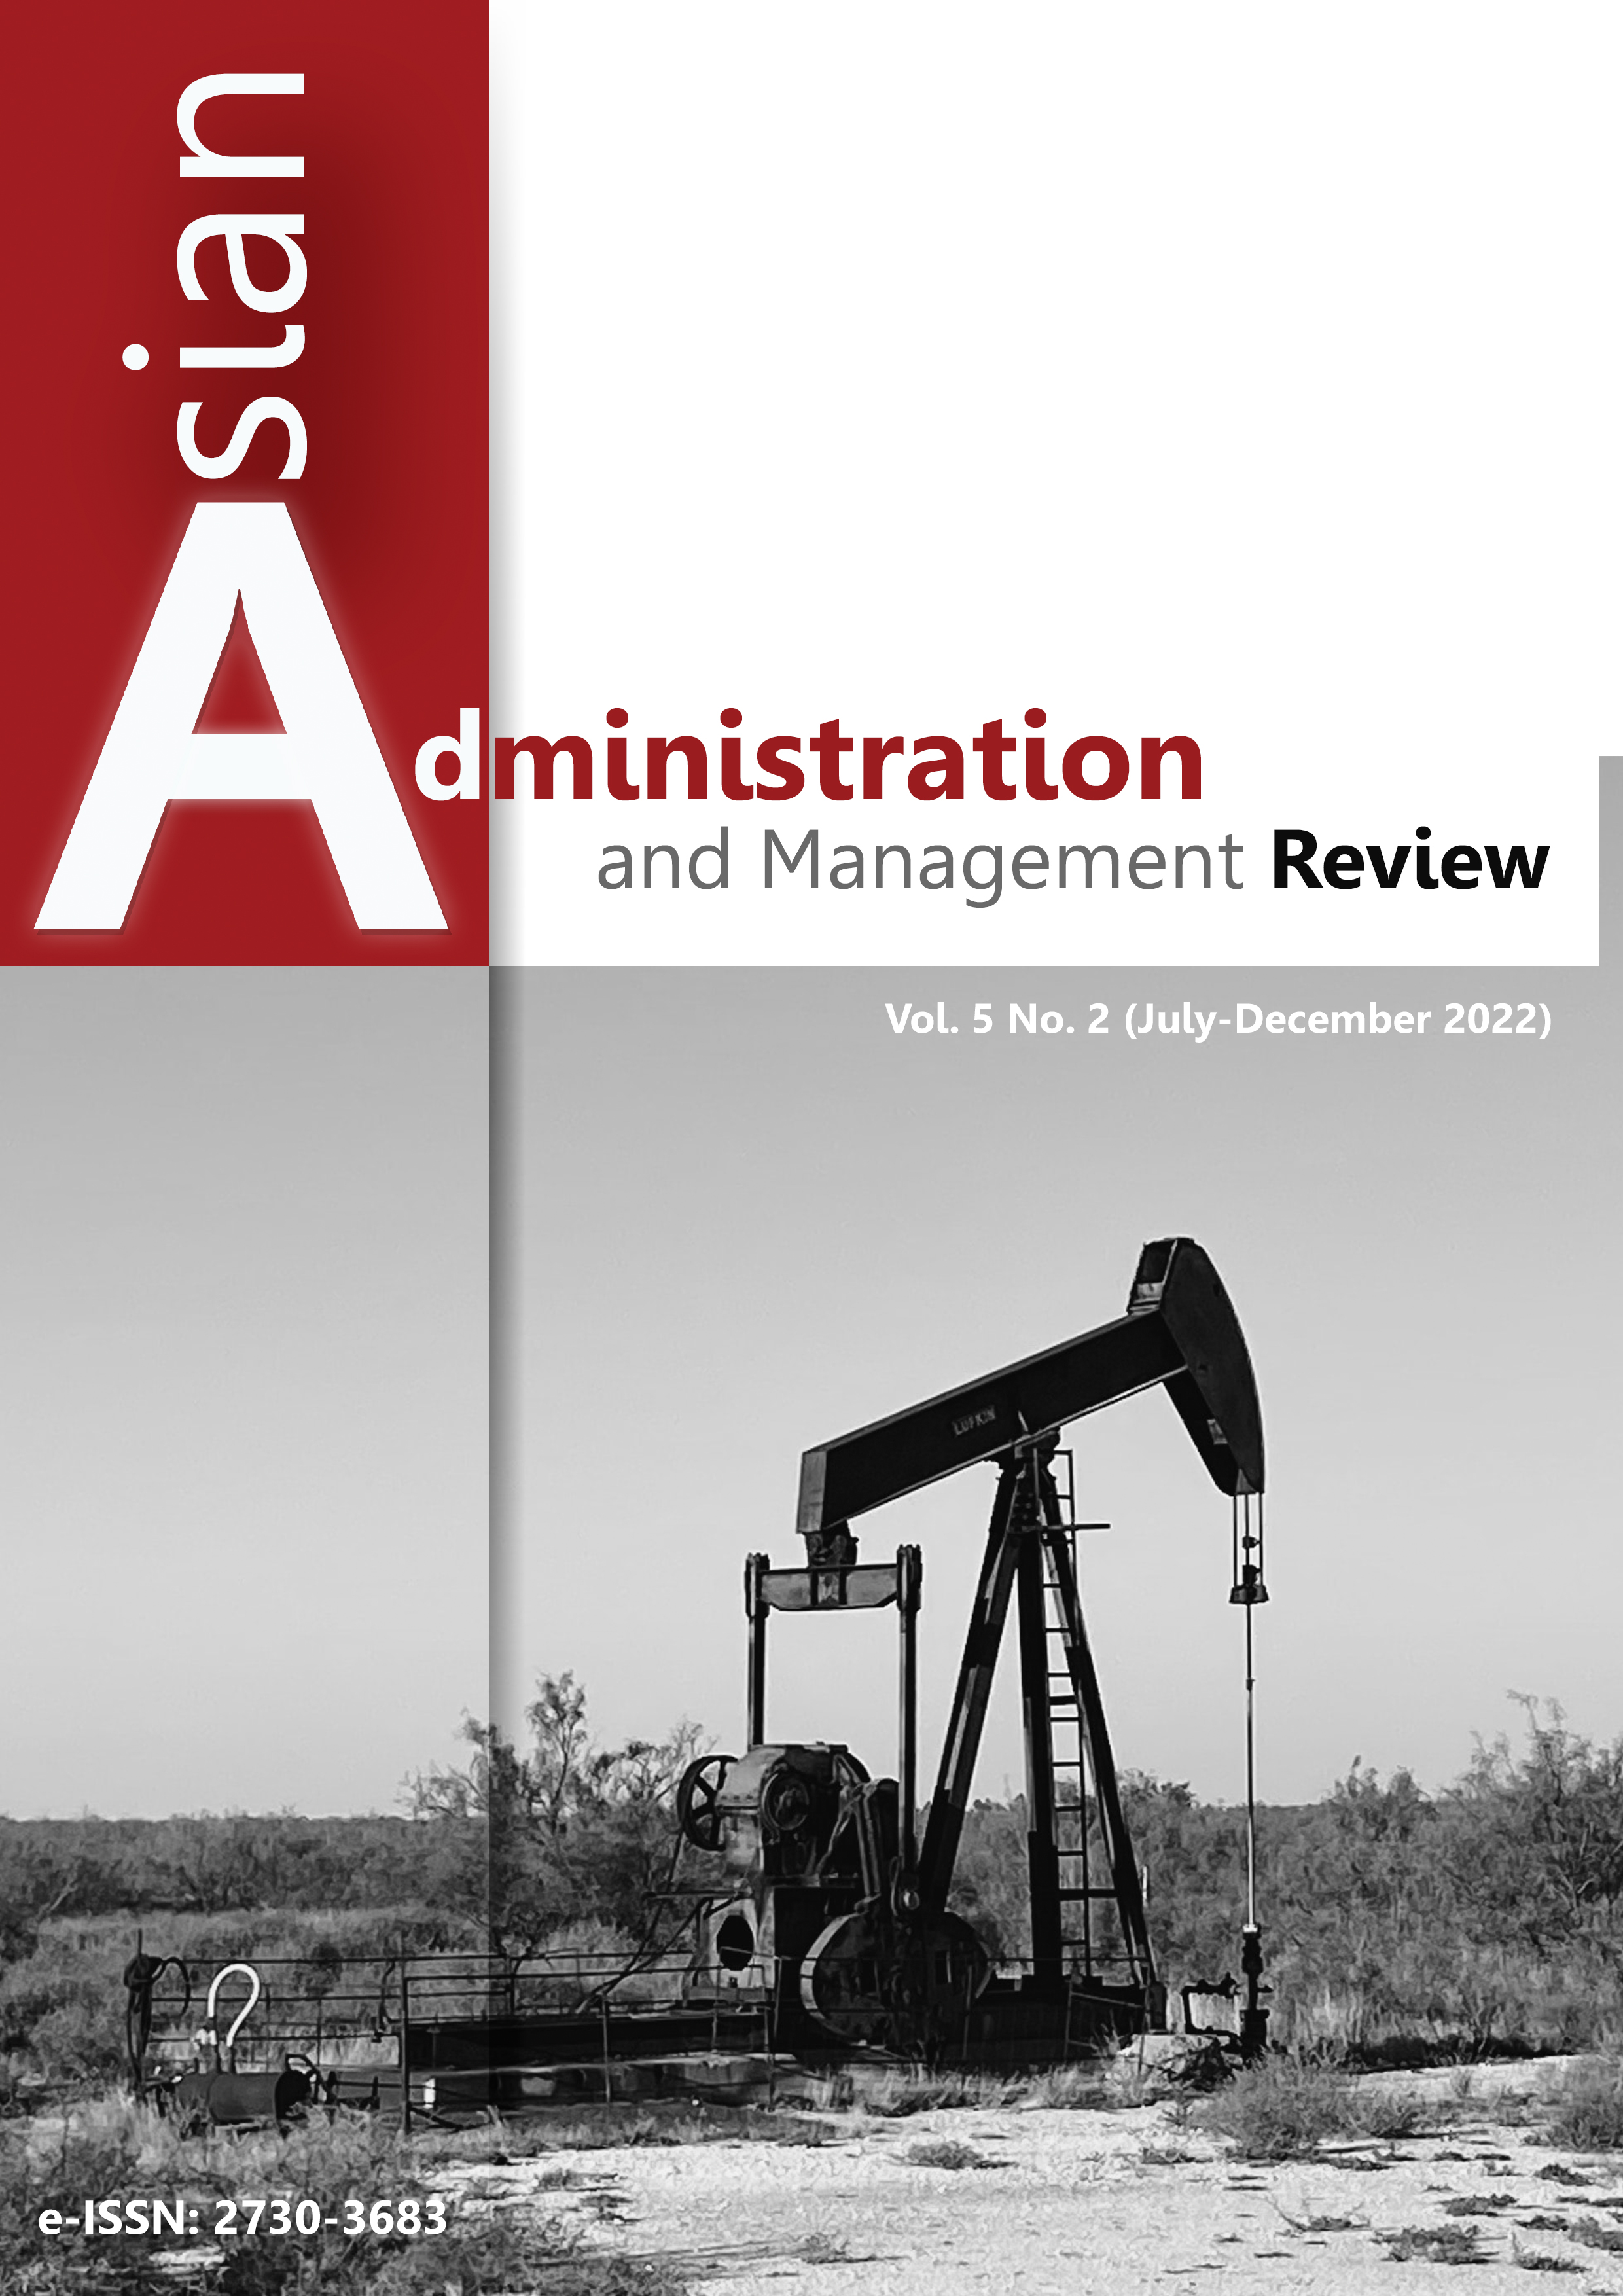 					View Vol. 5 No. 2 (2022): Asian Administration and Management Review
				